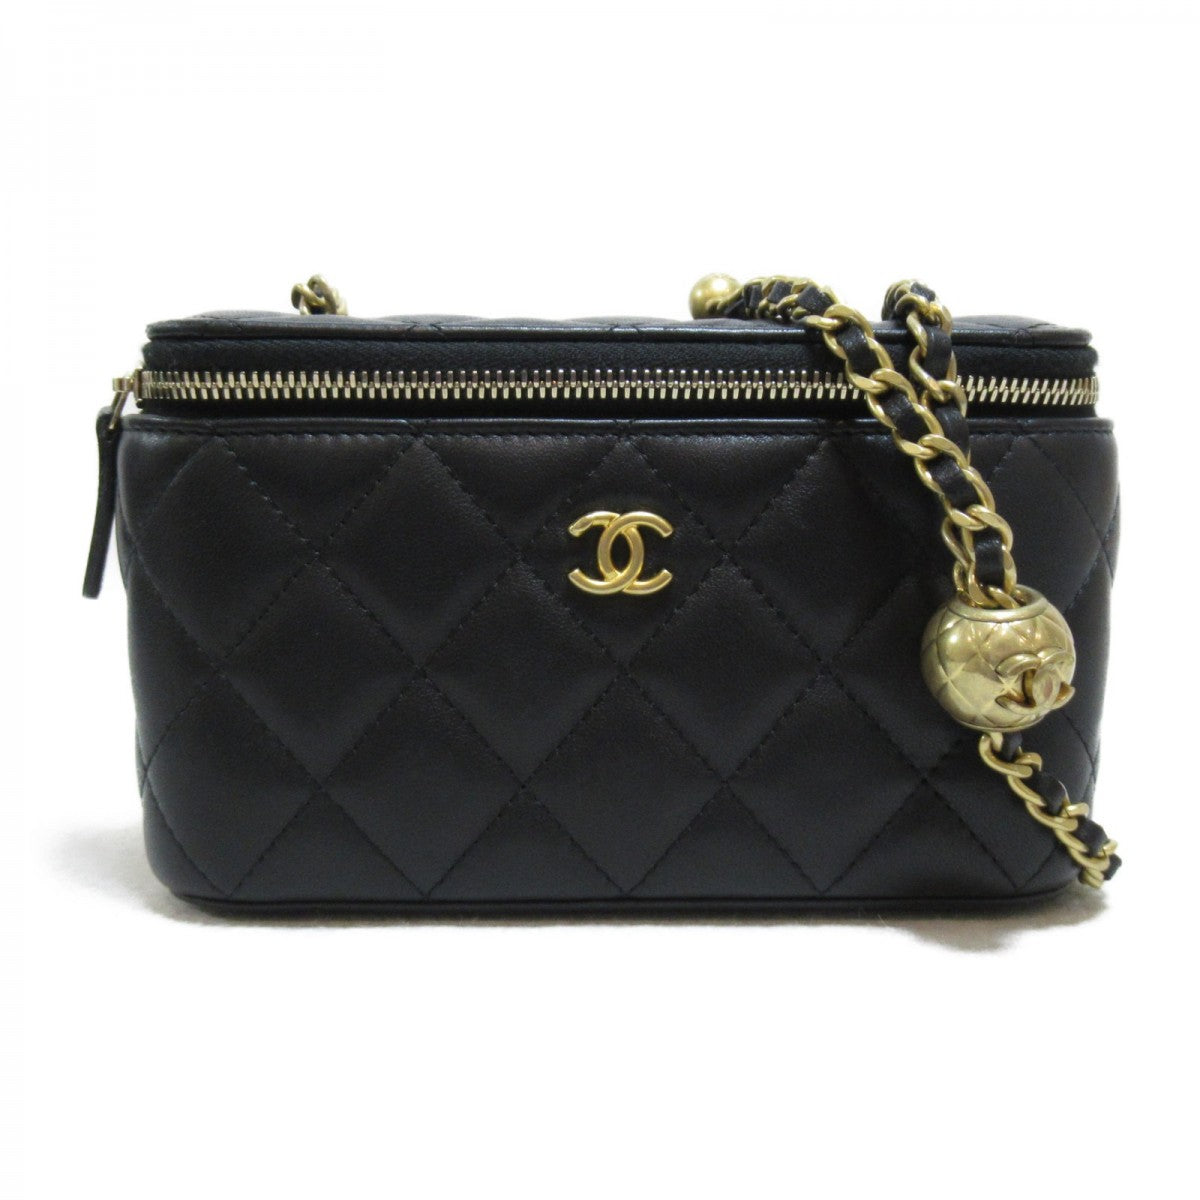 CC Quilted Leather Vanity Case